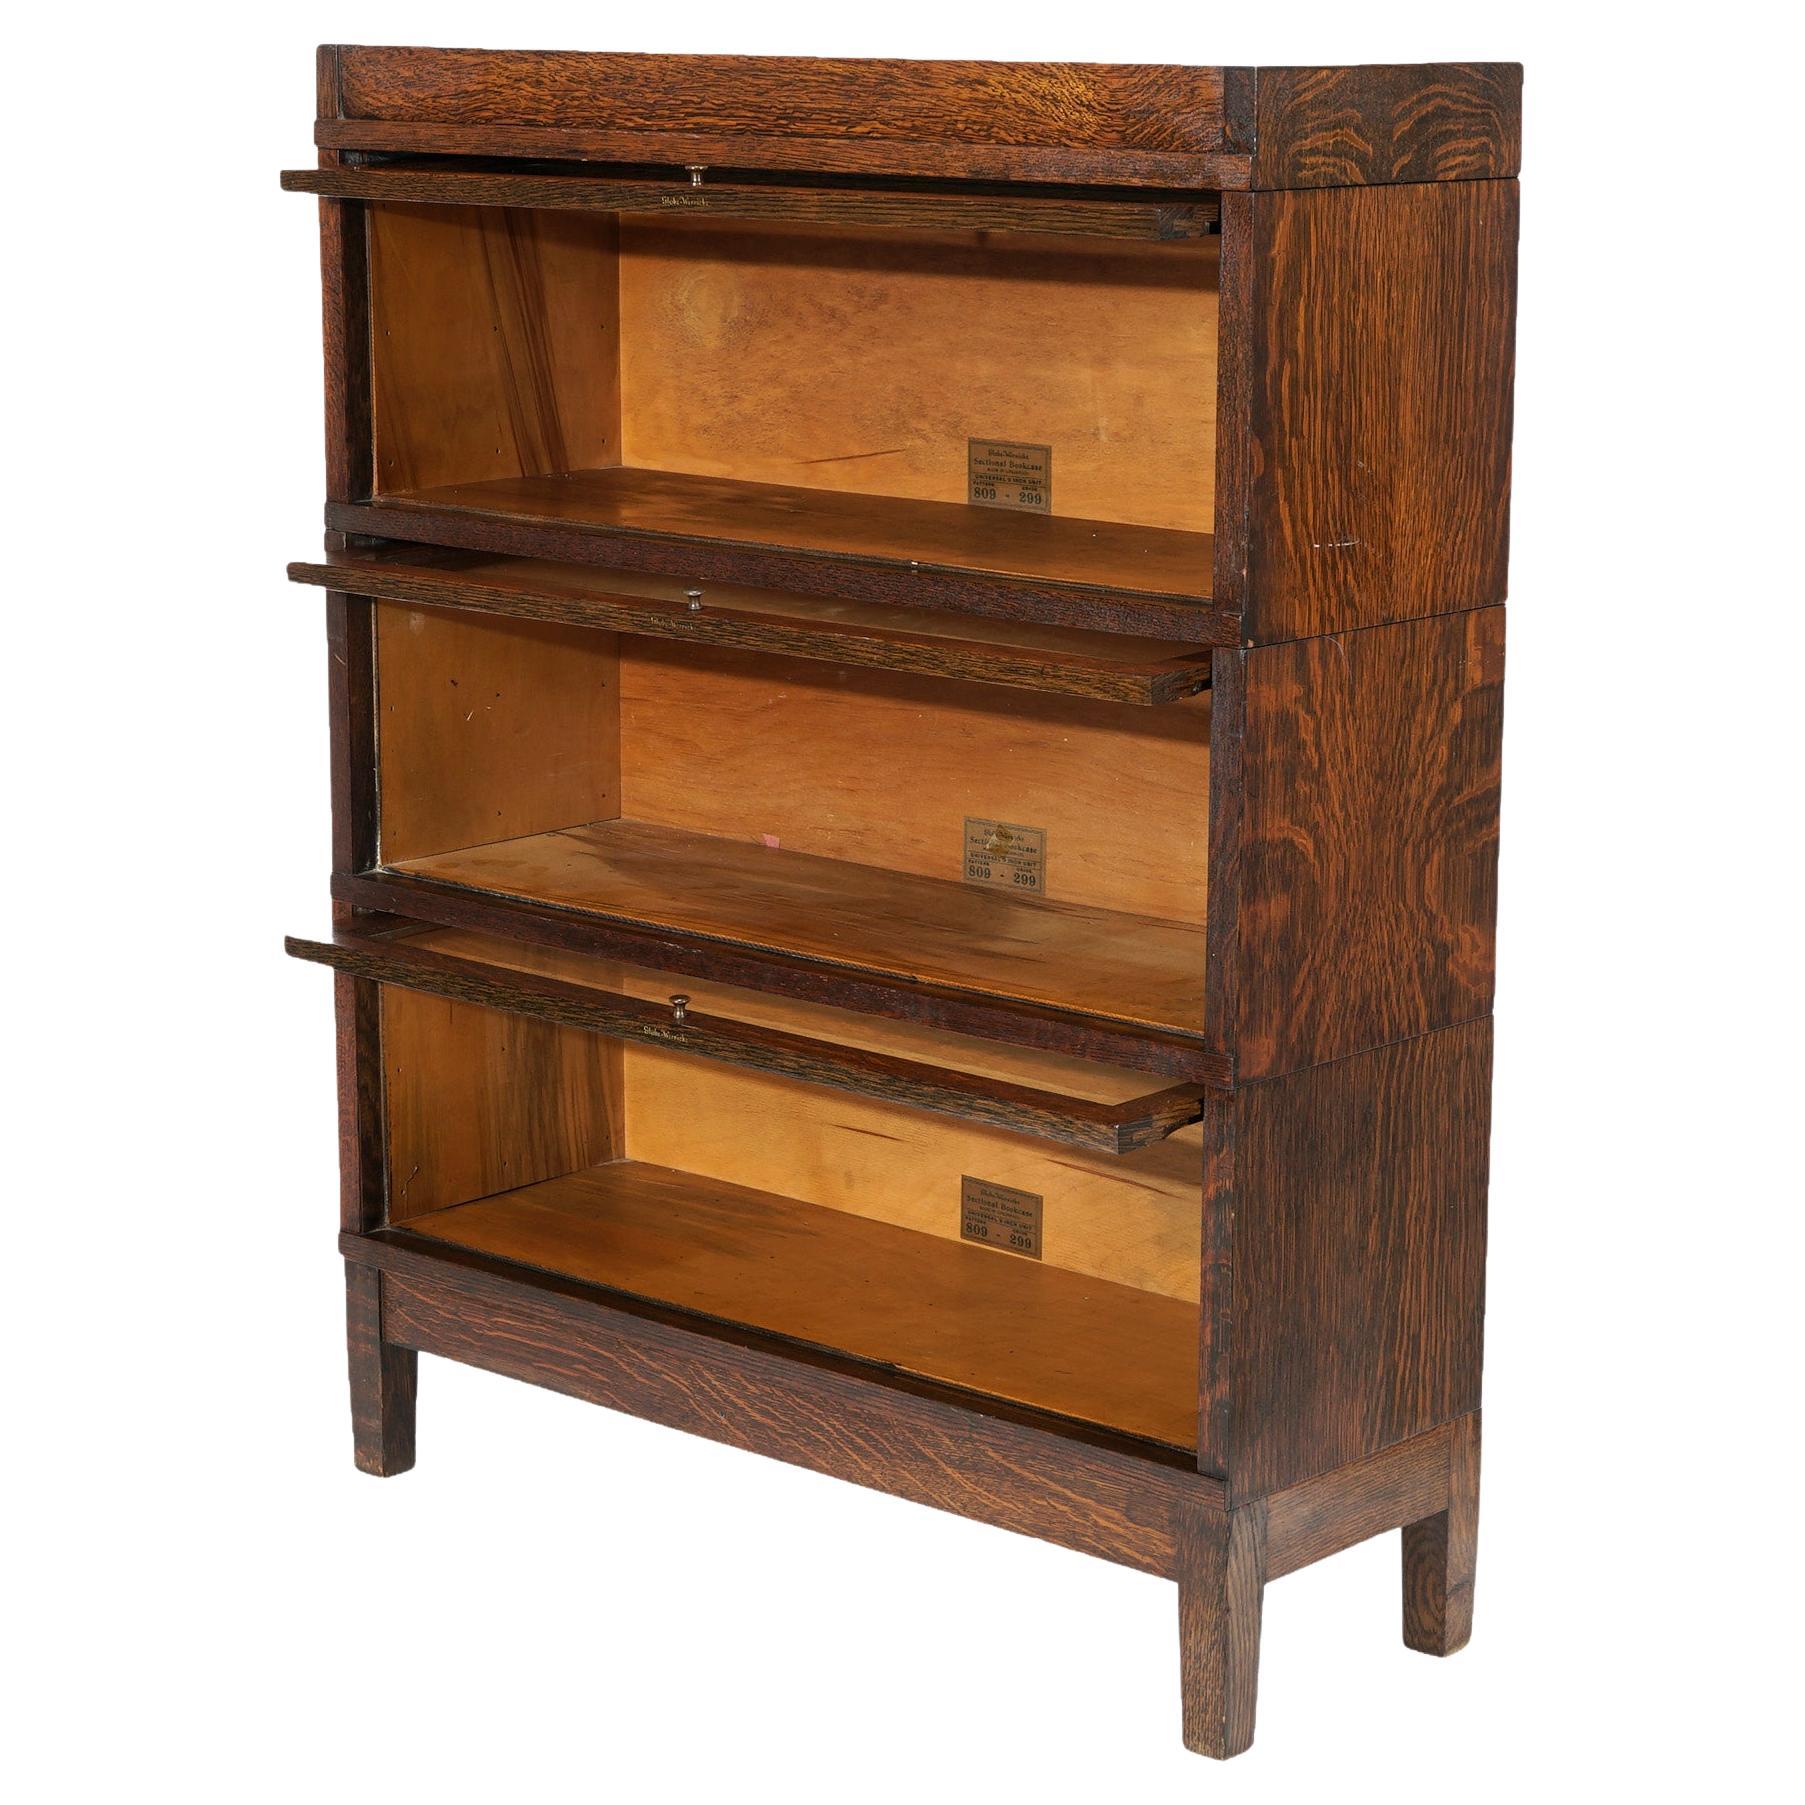 An antique Arts and Crafts Mission barrister bookcase by Globe Wernicke offers quarter sawn oak construction with three stacks each having pull out glass doors and raised on square and straight legs, maker labels as photographed, c1910

Measures-